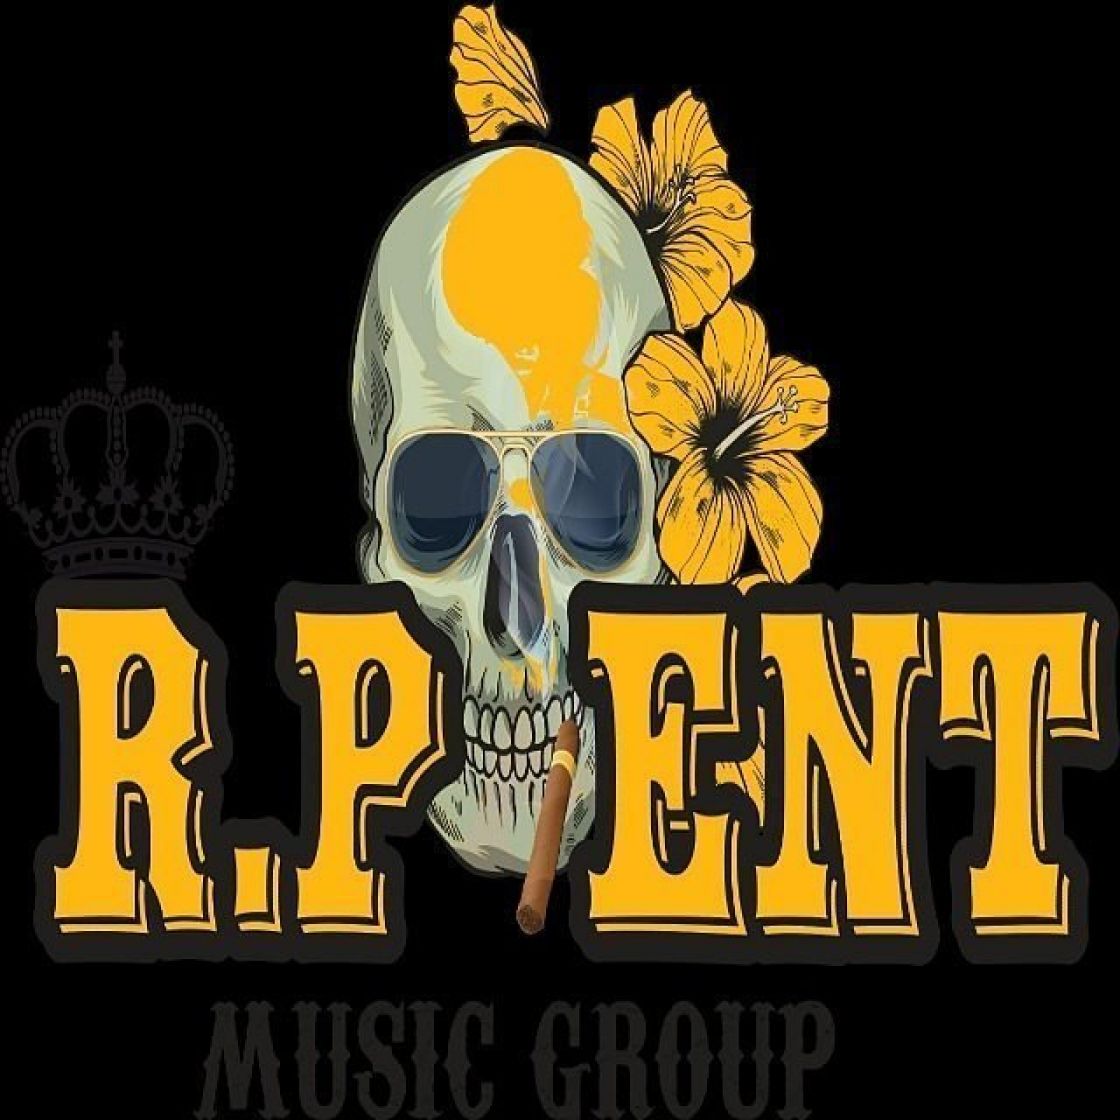 Introducing R.P ENT MUSIC GROUP production with two new hits Remaness and Stupido!